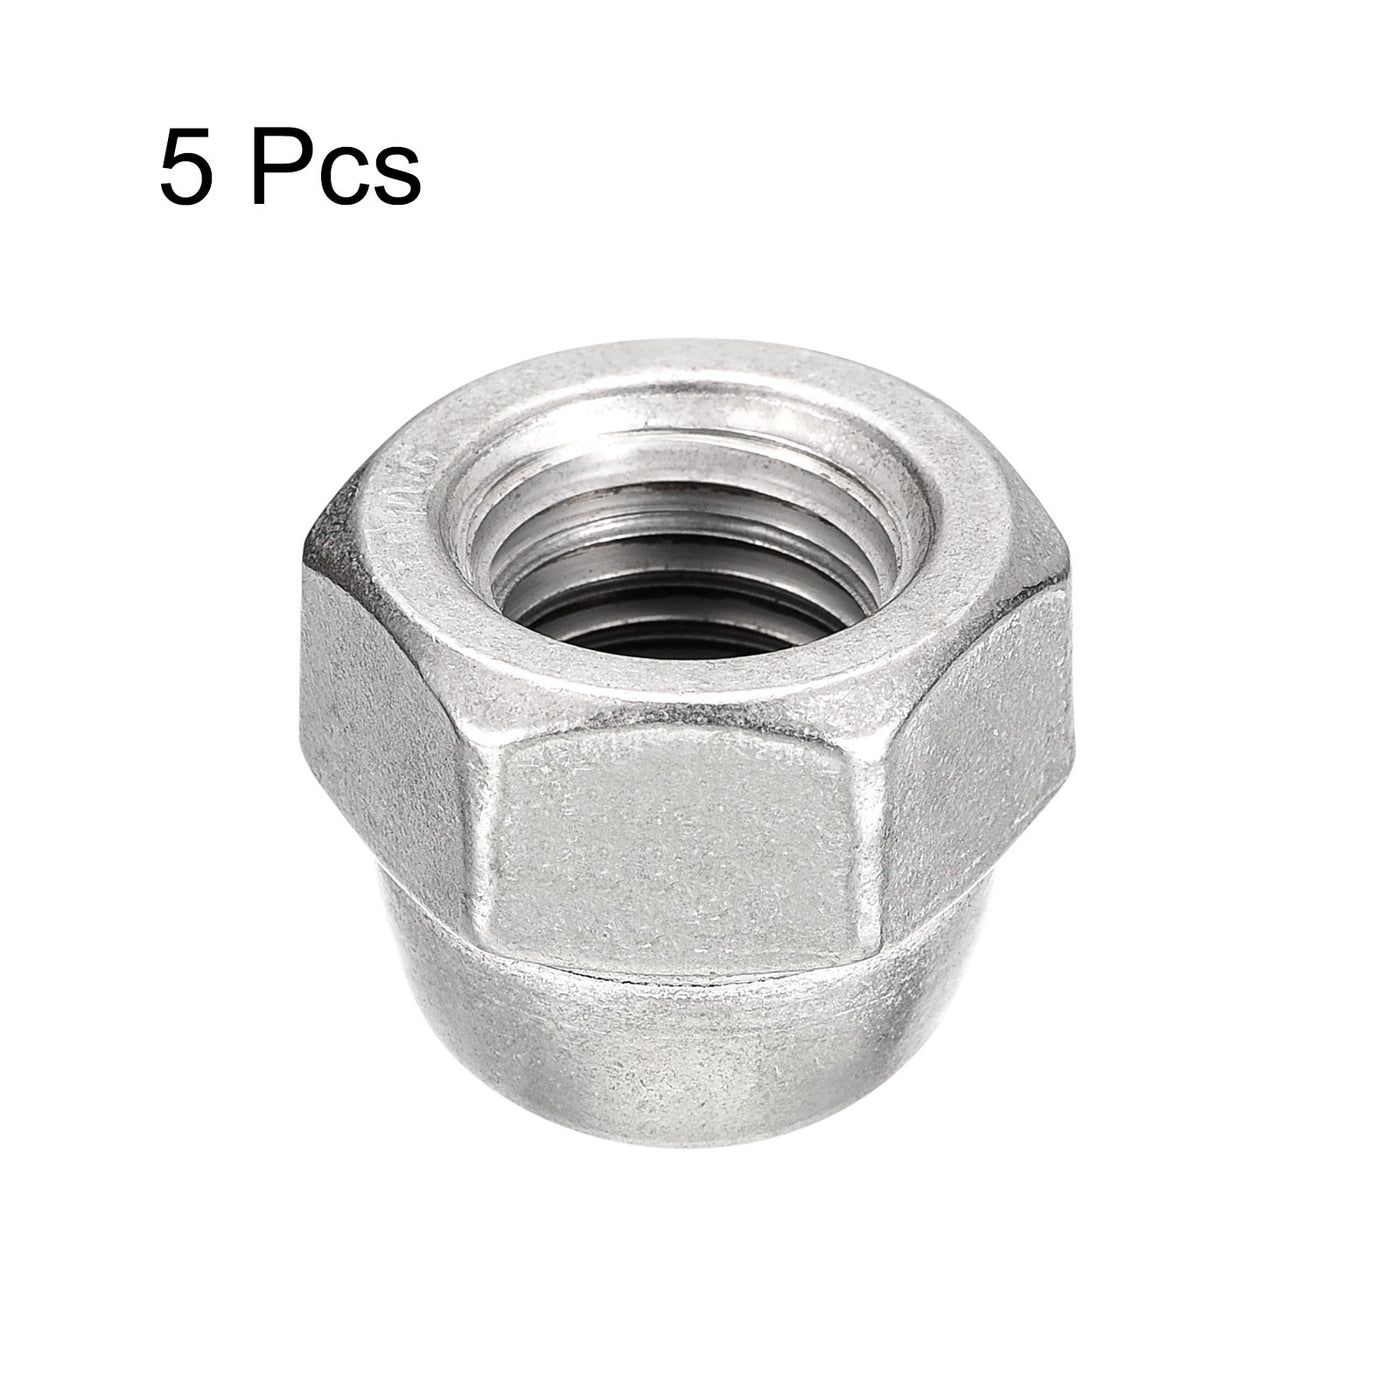 uxcell Uxcell 5/8-11 Acorn Cap Nuts,5pcs - 304 Stainless Steel Hardware Nuts, Acorn Hex Cap Dome Head Nuts for Fasteners (Silver)